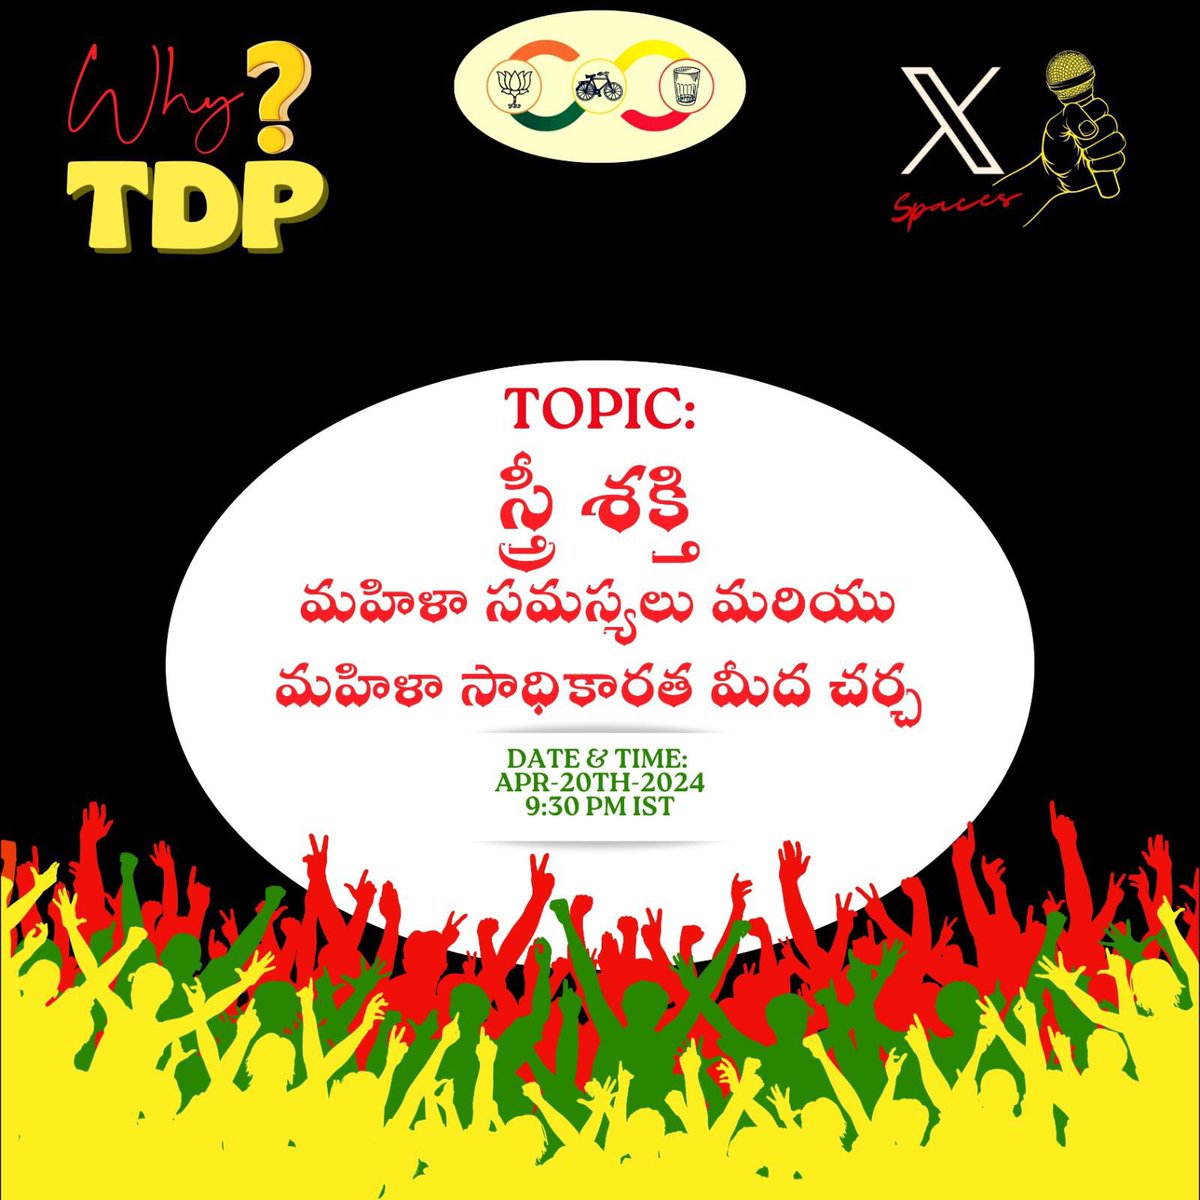 Please join today's space ✌️ #WhyTDP